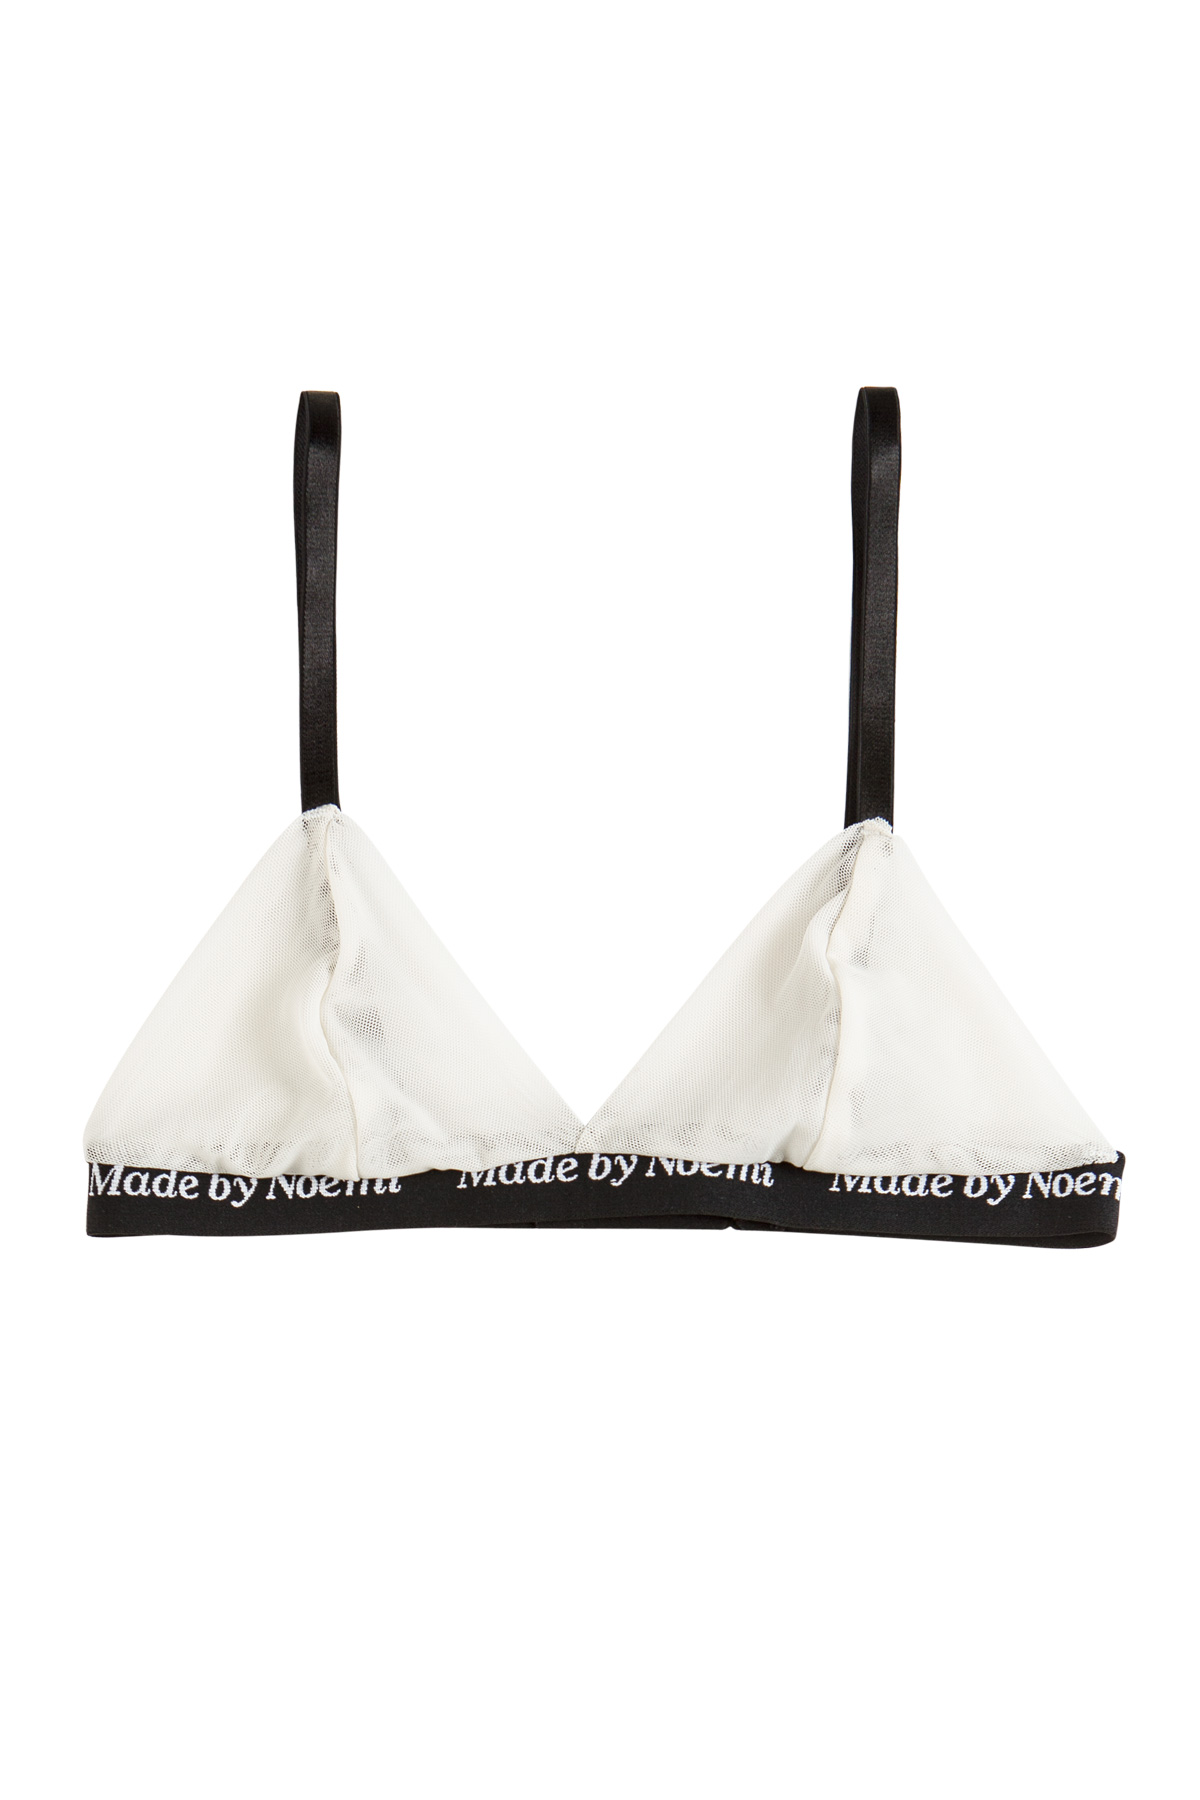 motor nedenunder Justering Off-white SheerPower bralette – Made by Noemi